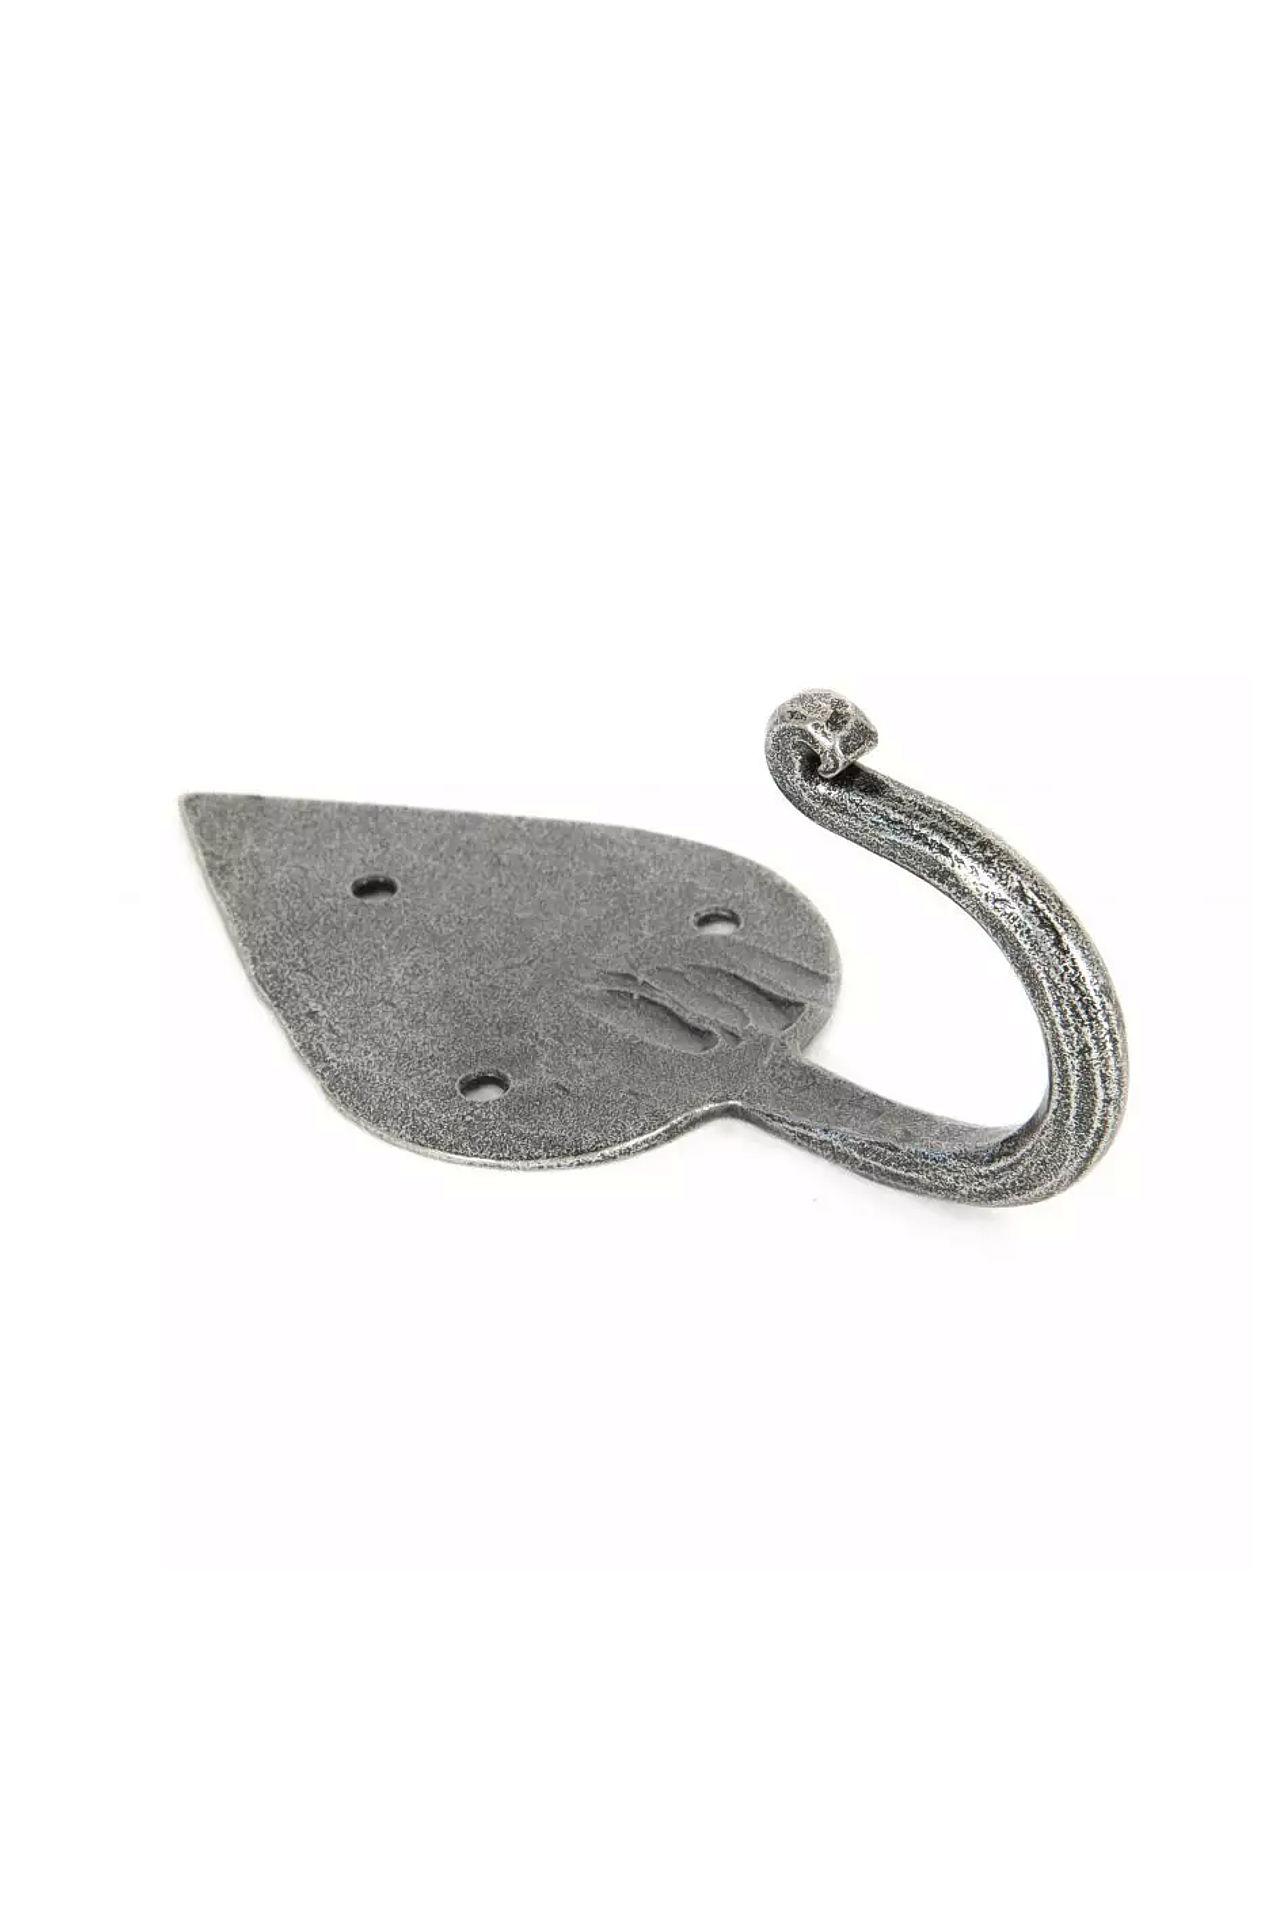 NEW From The Anvil Pewter Gothic Coat Hook #1